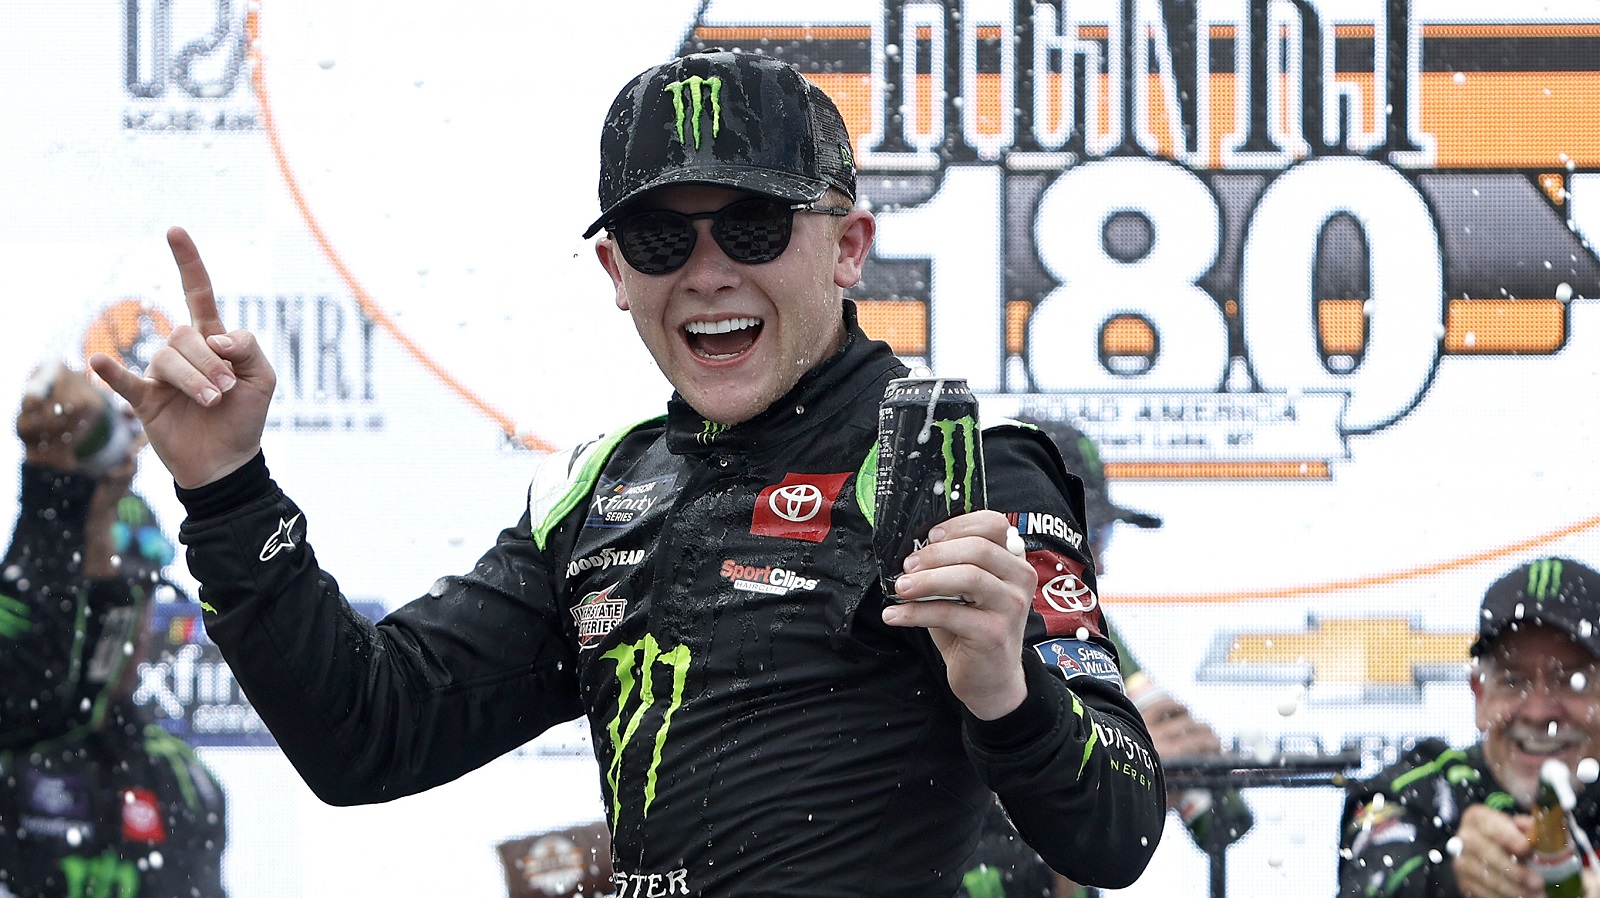 Ty Gibbs celebrates in after winning the NASCAR Xfinity Series Henry 180 at Road America on July 2, 2022, in Elkhart Lake, Wisconsin. | Sean Gardner/Getty Images